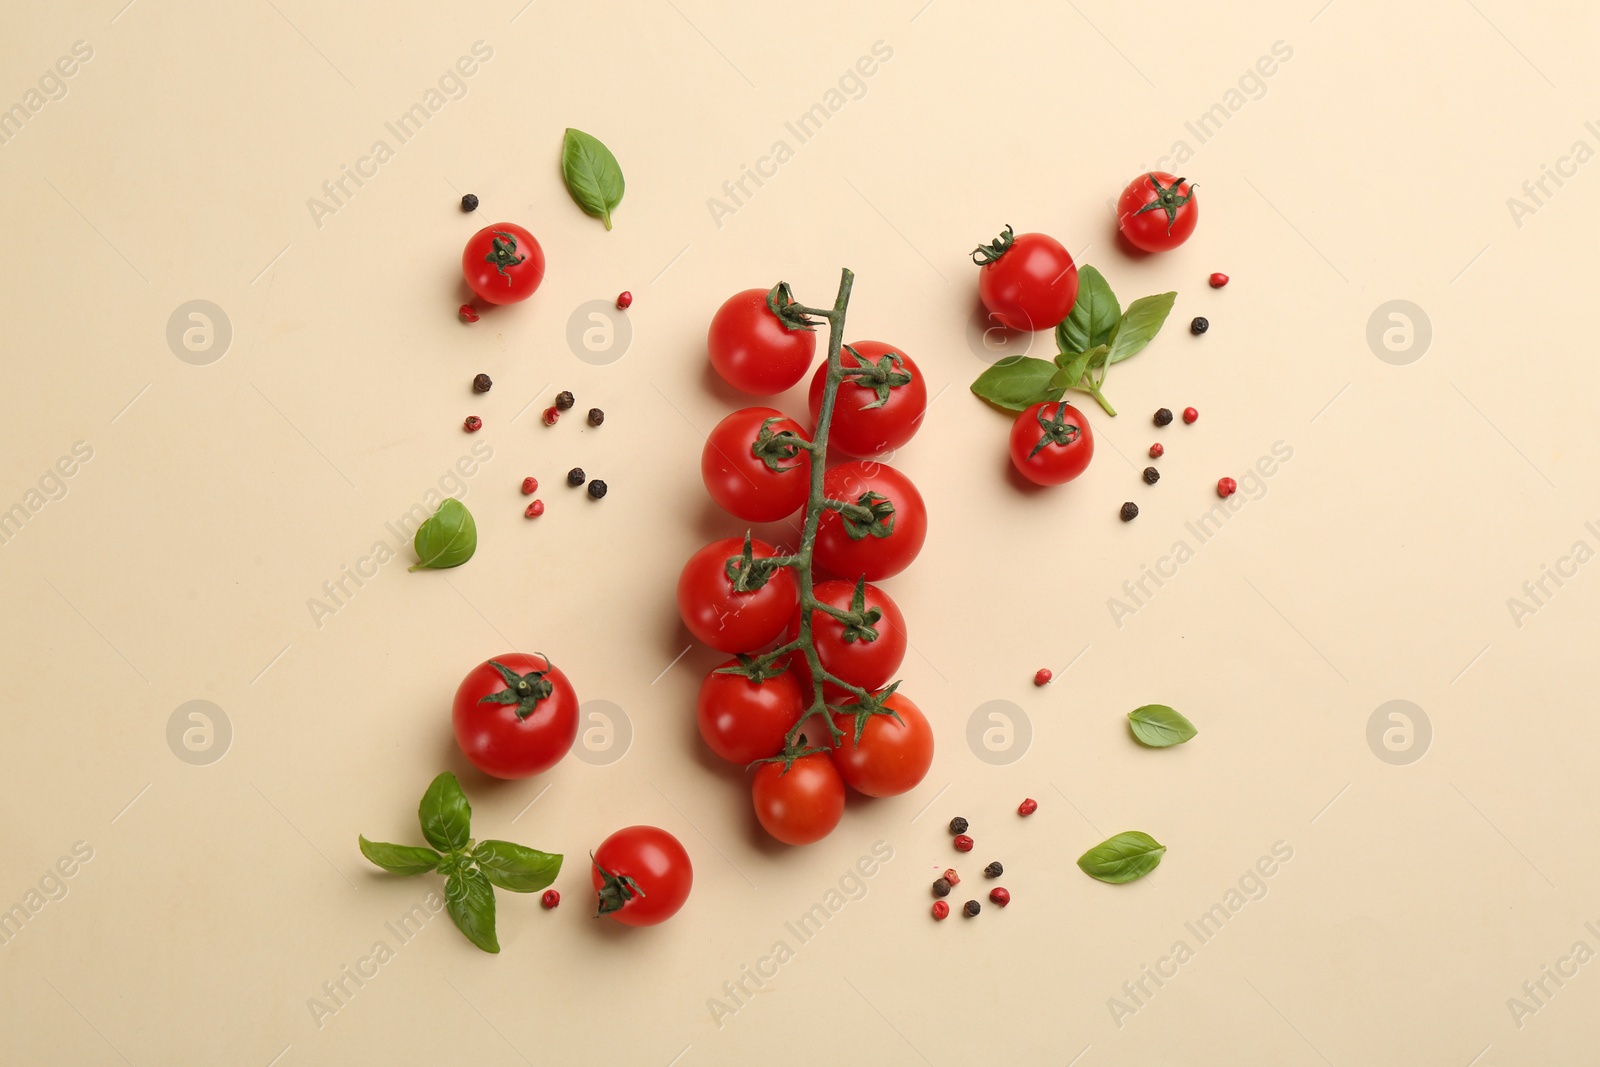 Photo of Fresh cherry tomatoes, basil leaves and pepper grains on beige background, flat lay